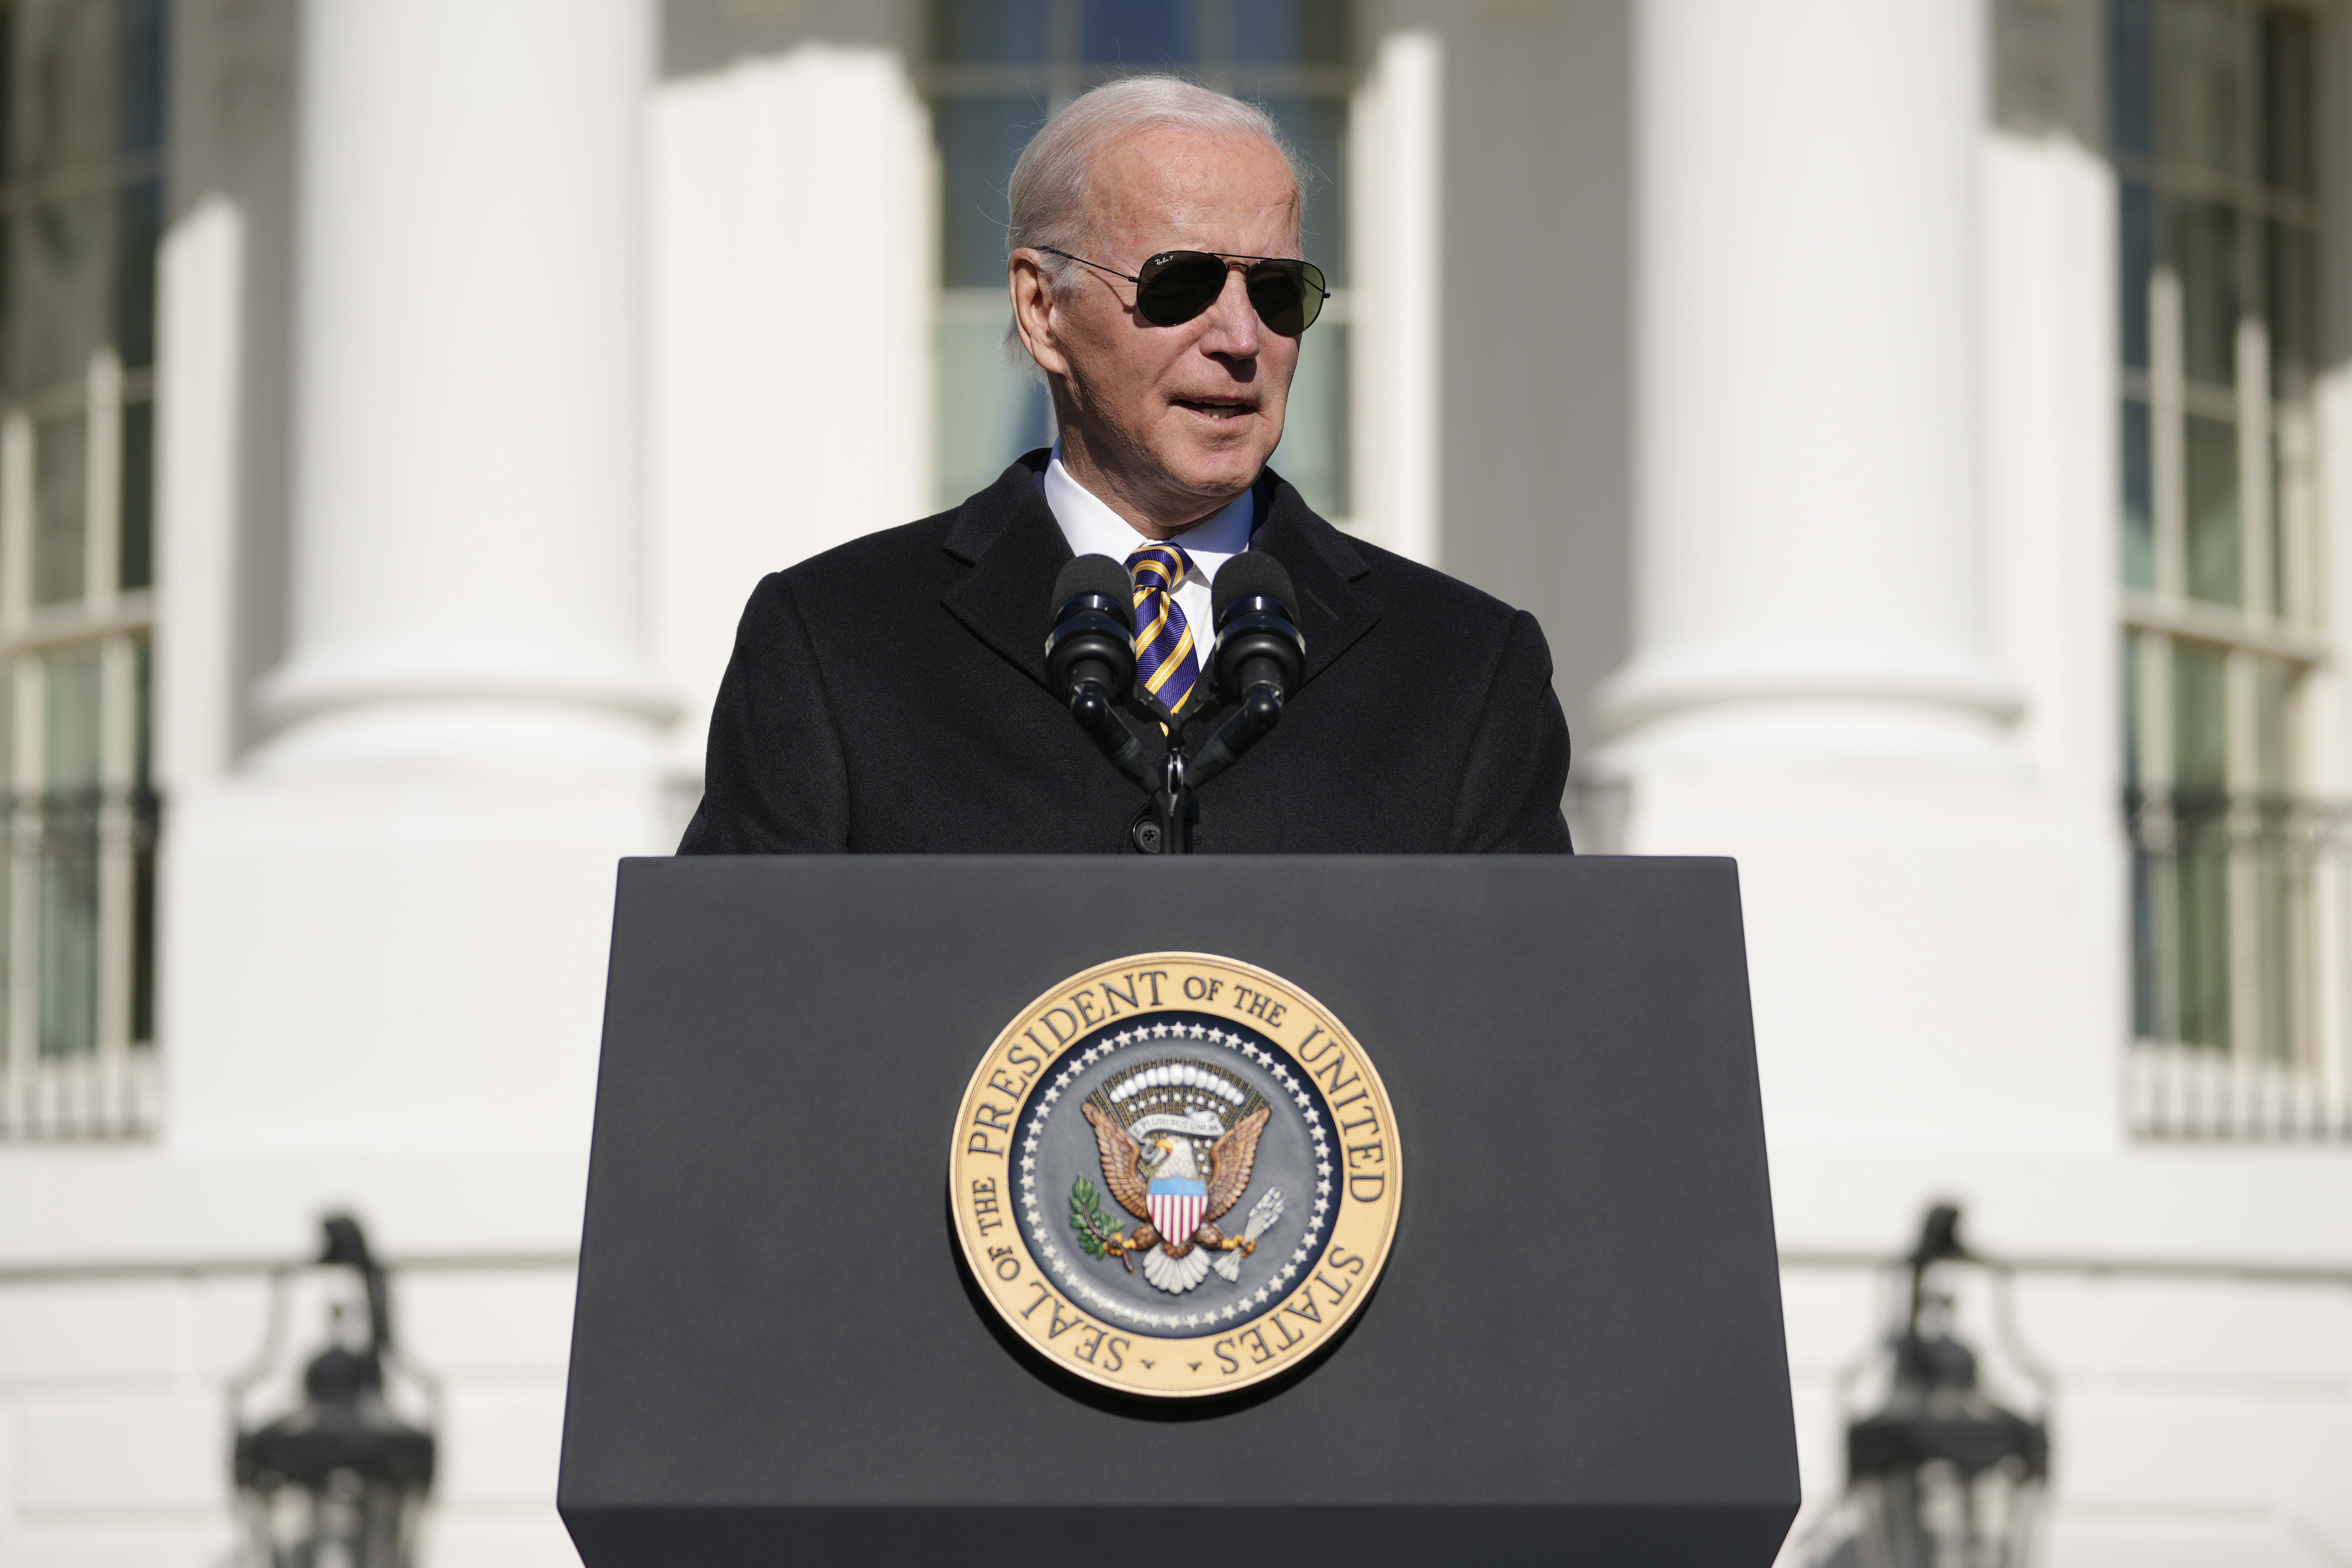 Biden Says He'll Renew Push for Assault Weapons Ban Following Spate of Mass Shootings